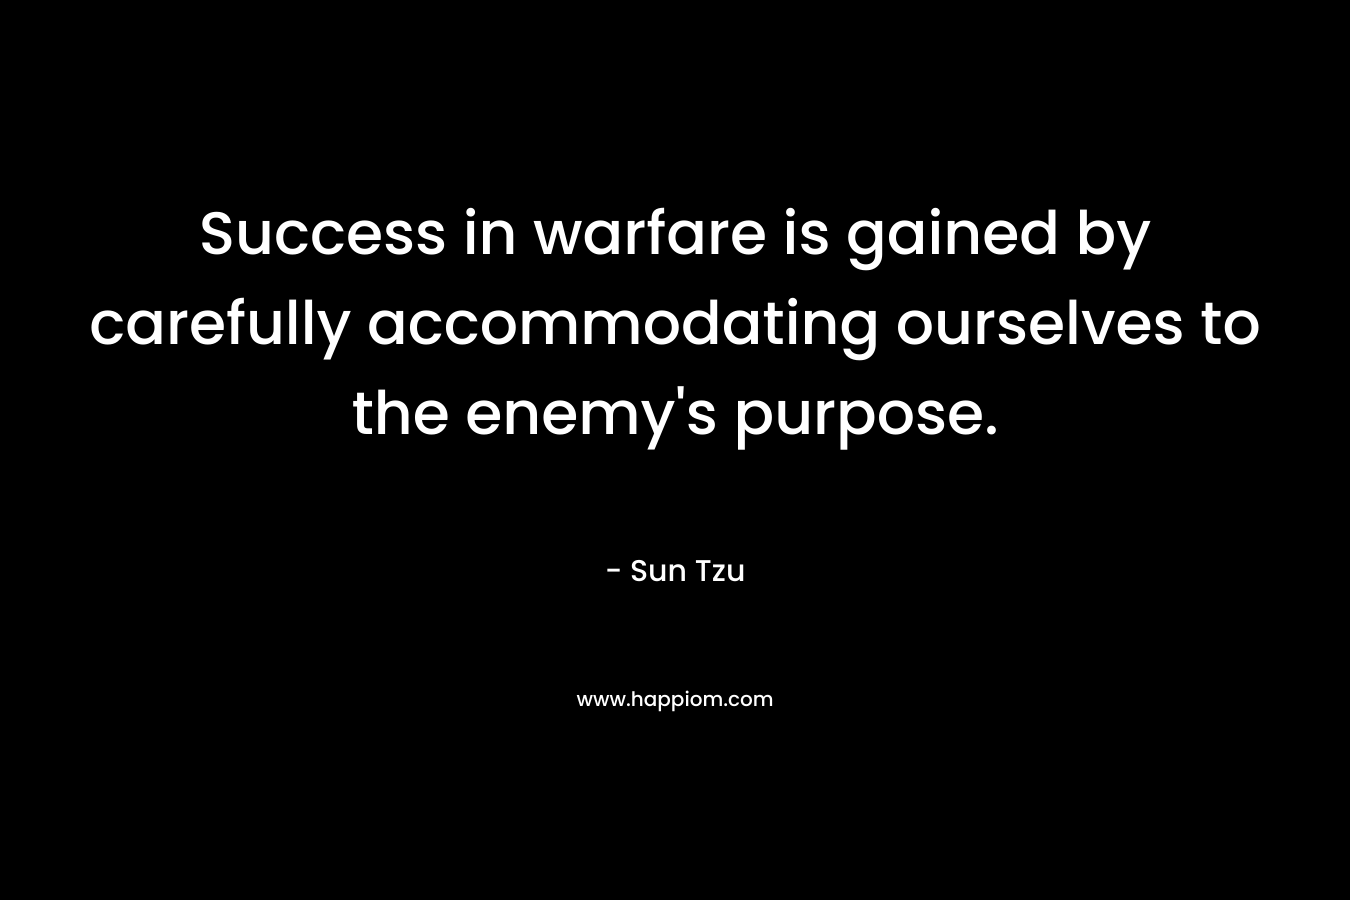 Success in warfare is gained by carefully accommodating ourselves to the enemy's purpose.